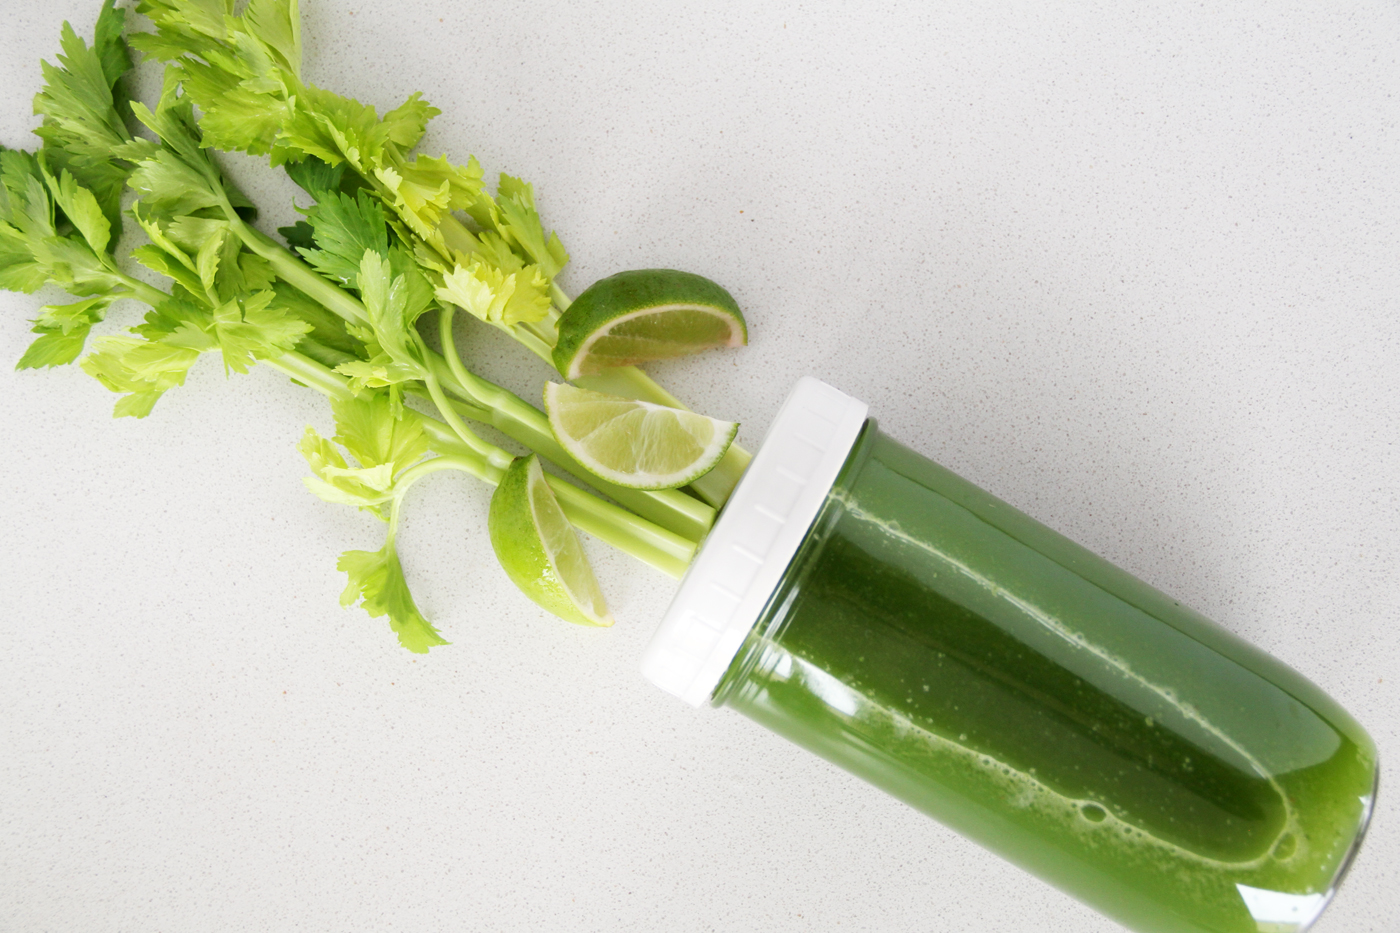 Celery provides tons of essential nutrients for our bodies and the benefits of celery juice include detoxification, antioxidation, and regeneration.